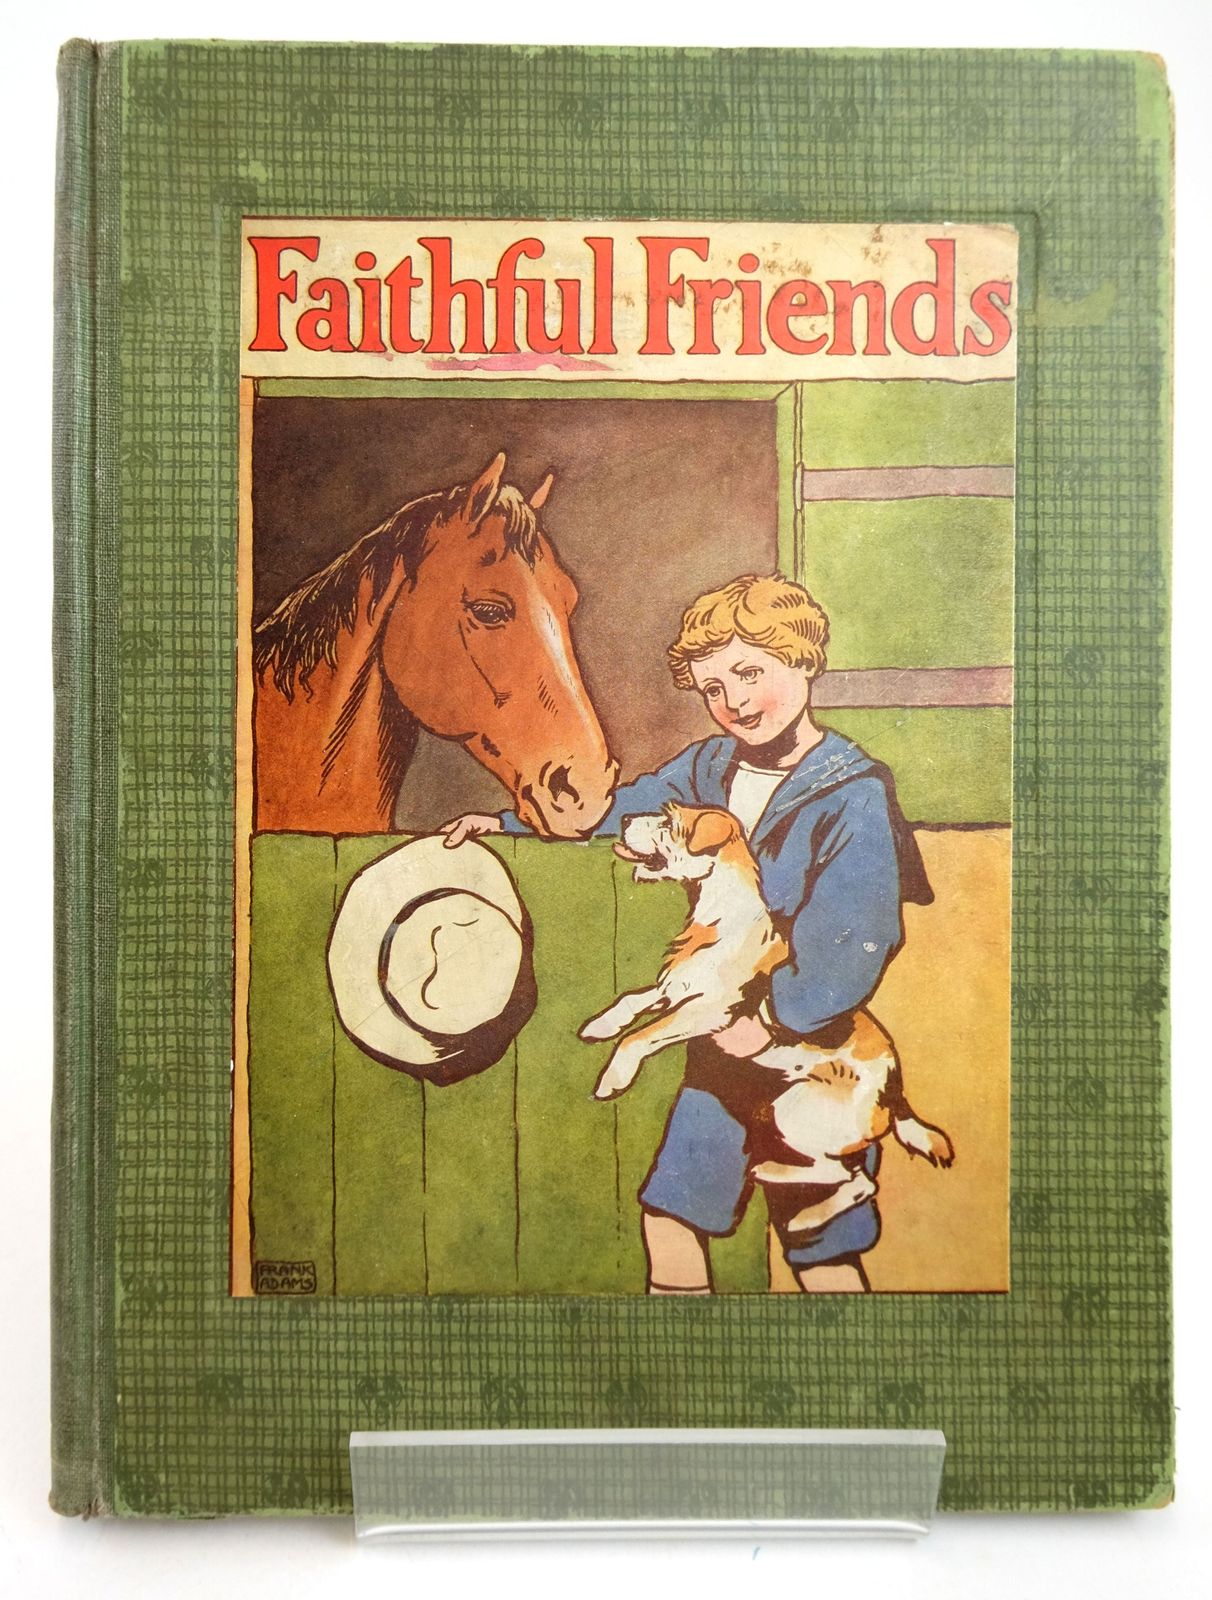 Photo of FAITHFUL FRIENDS illustrated by Aldin, Cecil
Rackham, Arthur
et al., published by Blackie & Son Ltd. (STOCK CODE: 1819578)  for sale by Stella & Rose's Books